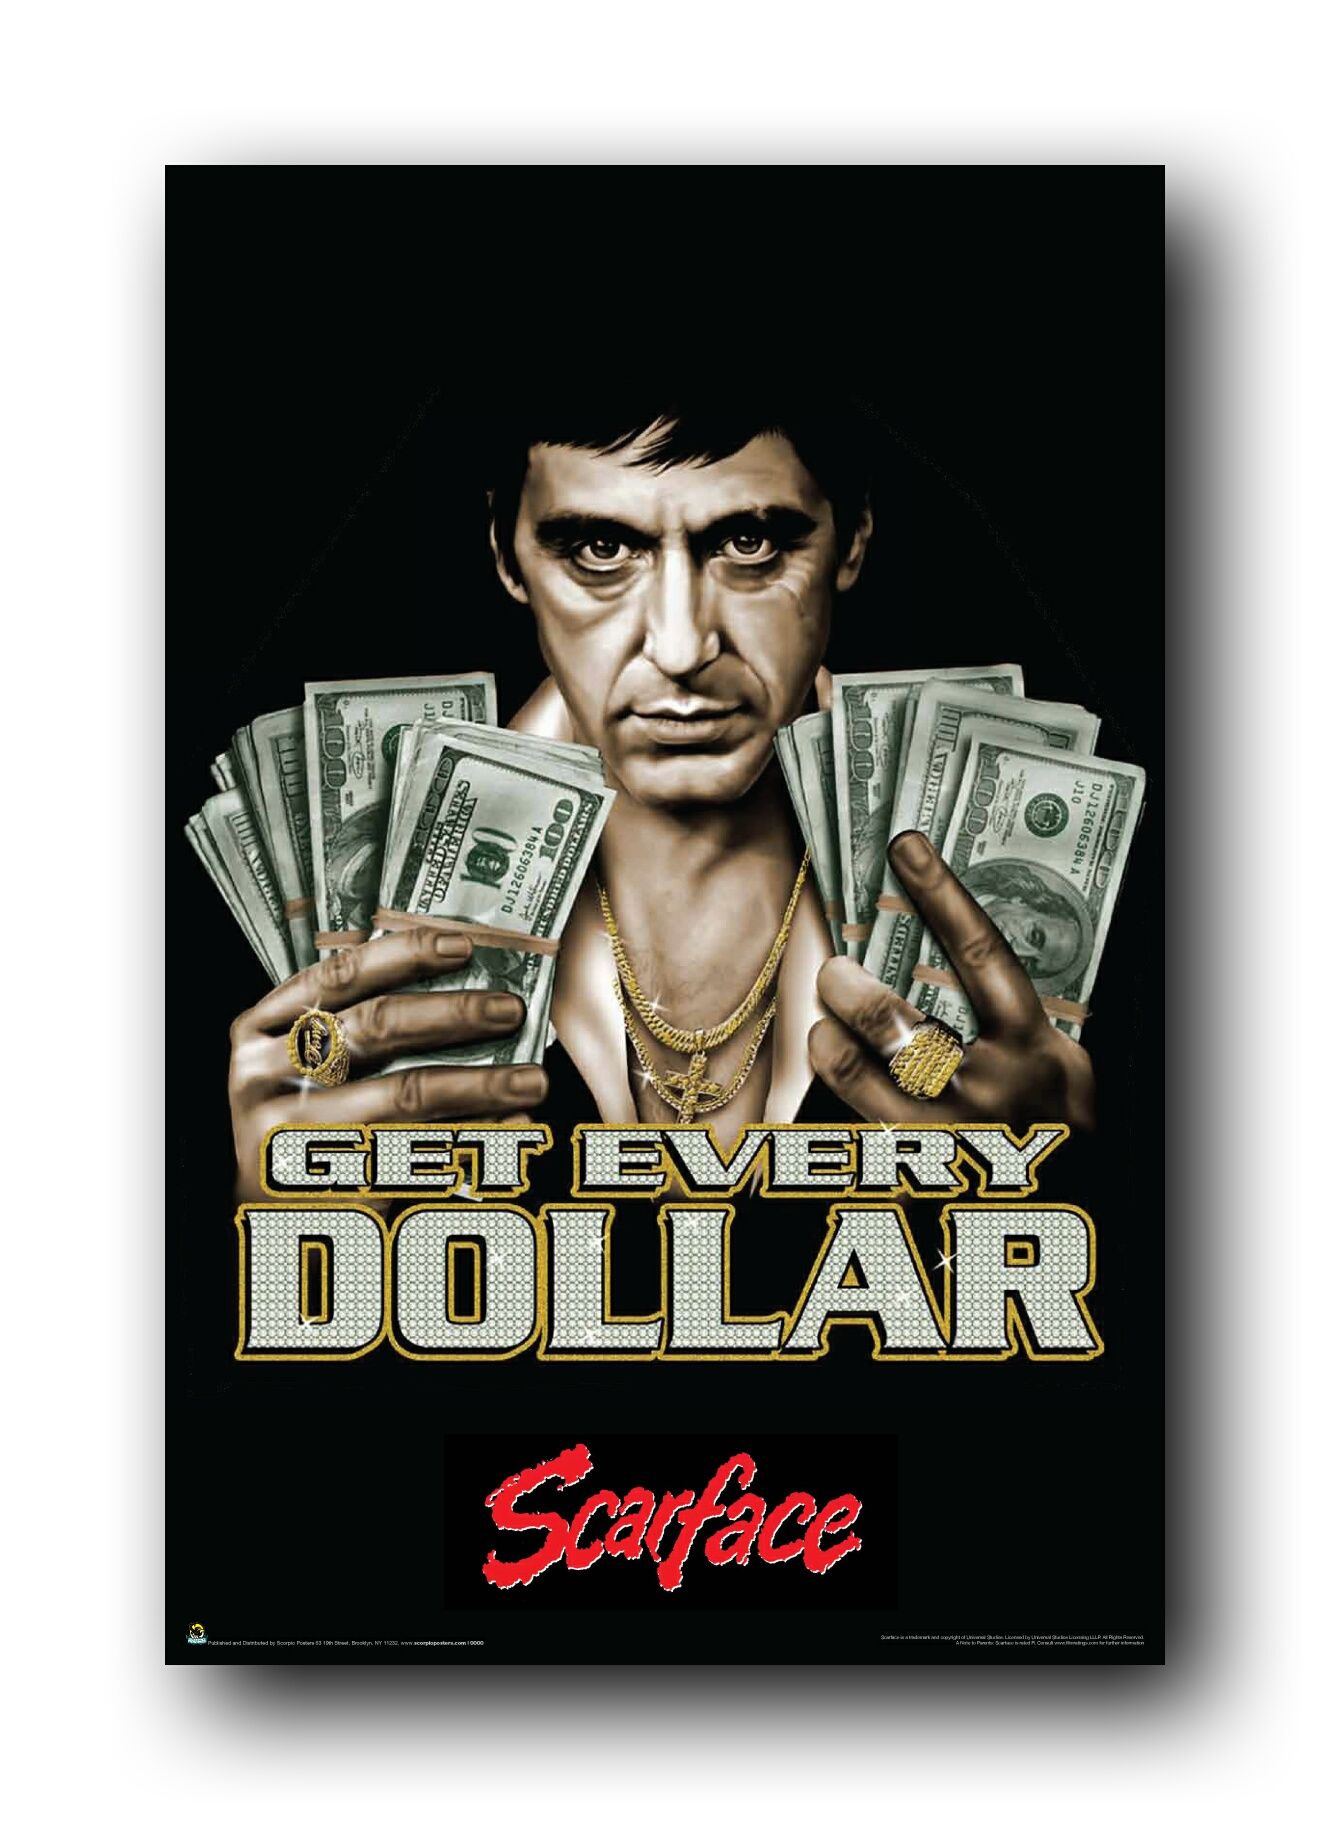 Scarface iPhone Wallpaper Free Scarface iPhone Background